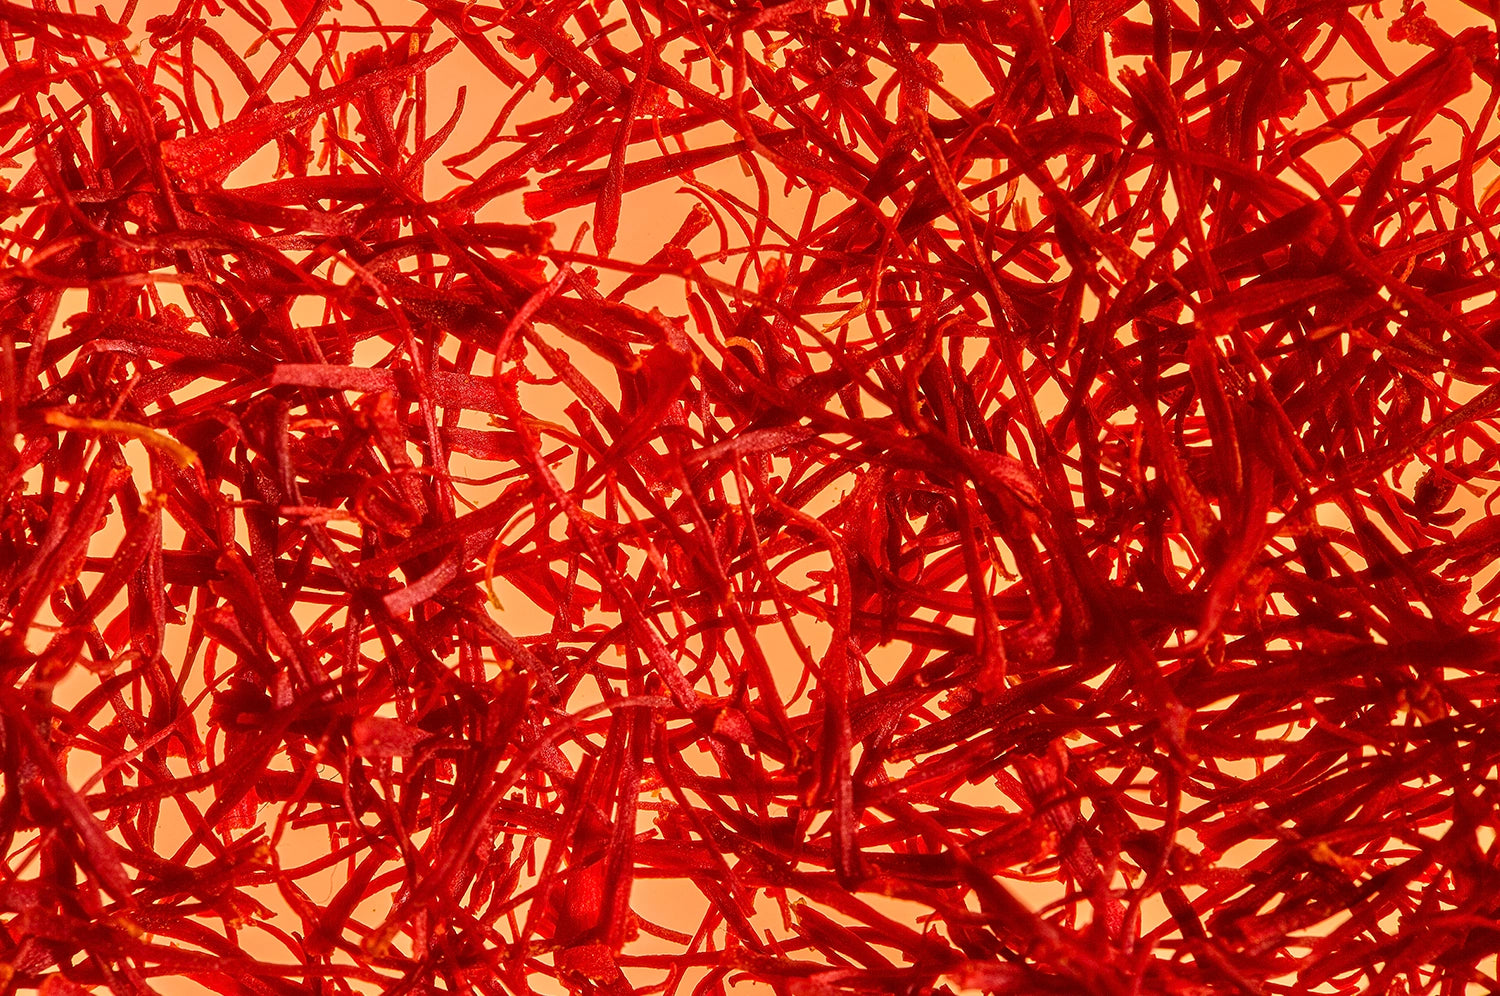 An up-close image of The Fullest's saffron threads on an orange surface.